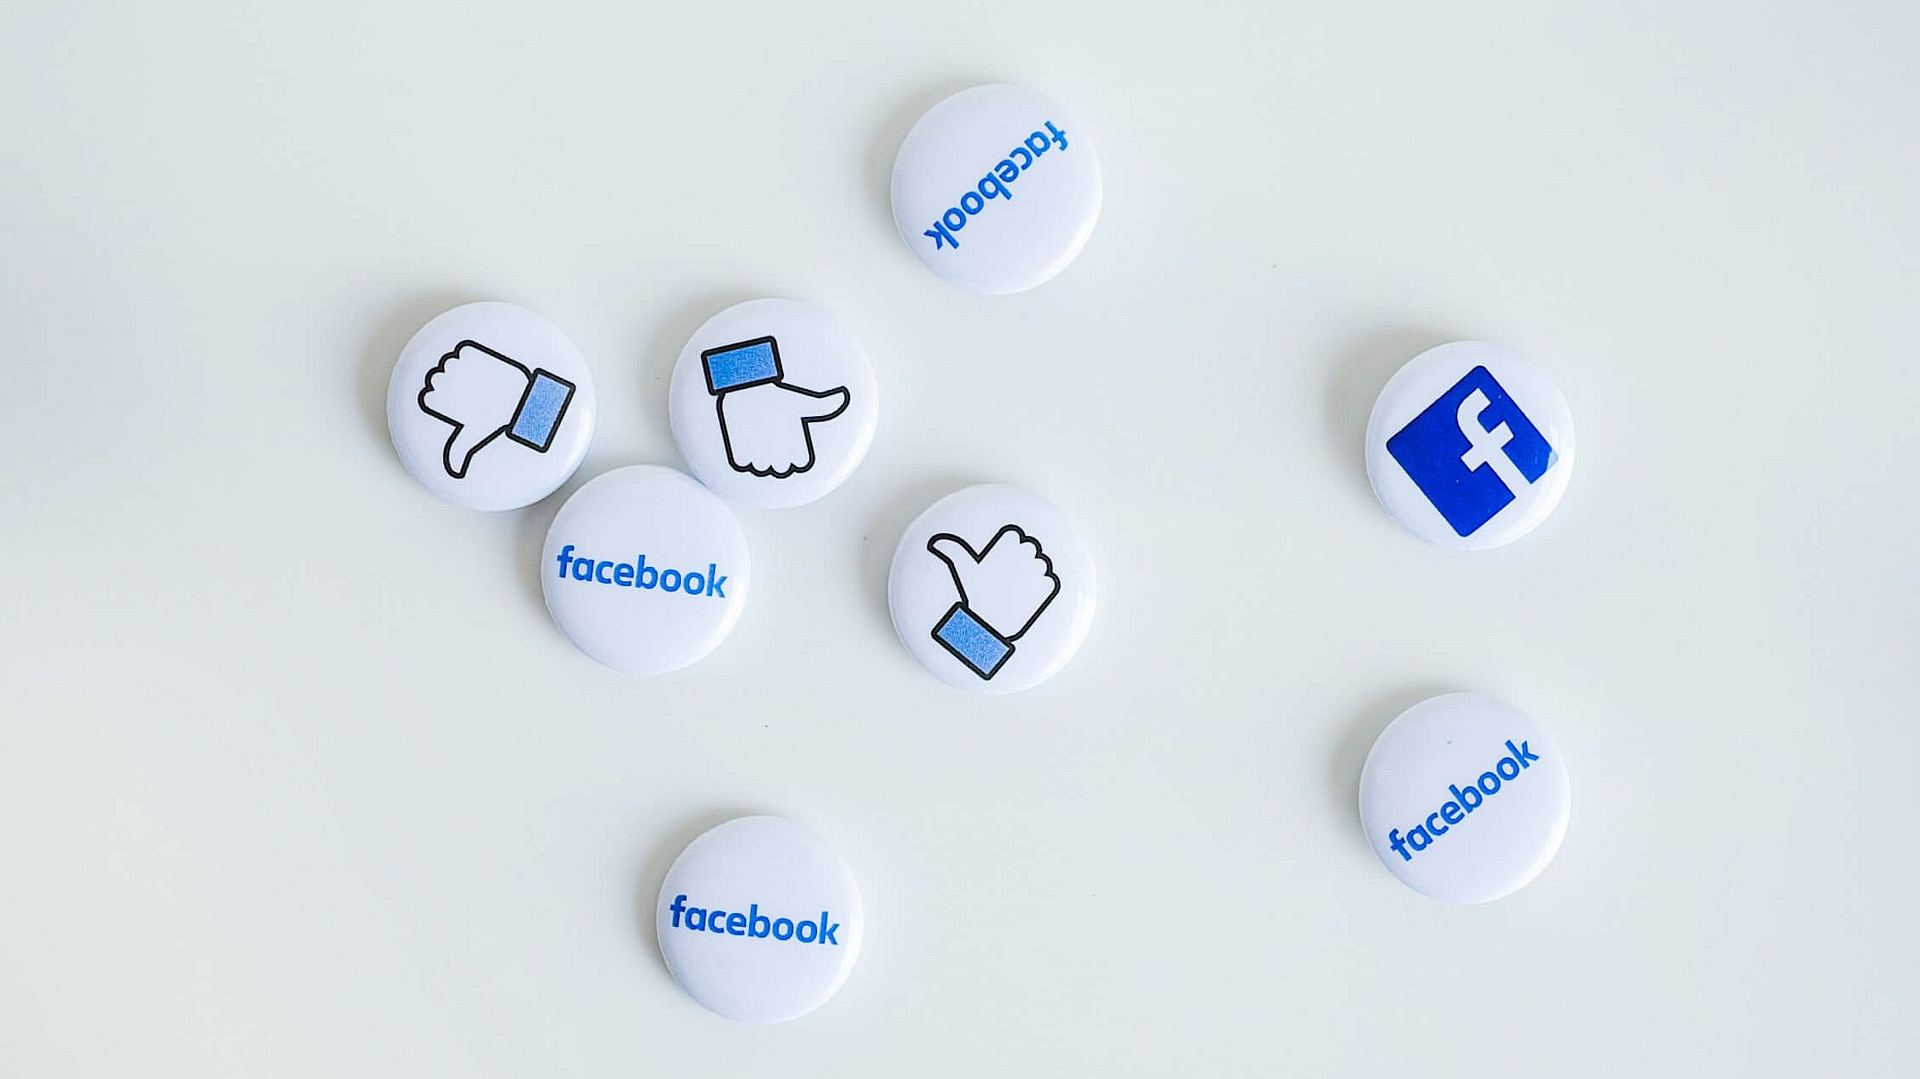 Buttons with Facebook logos and 'like' icon.